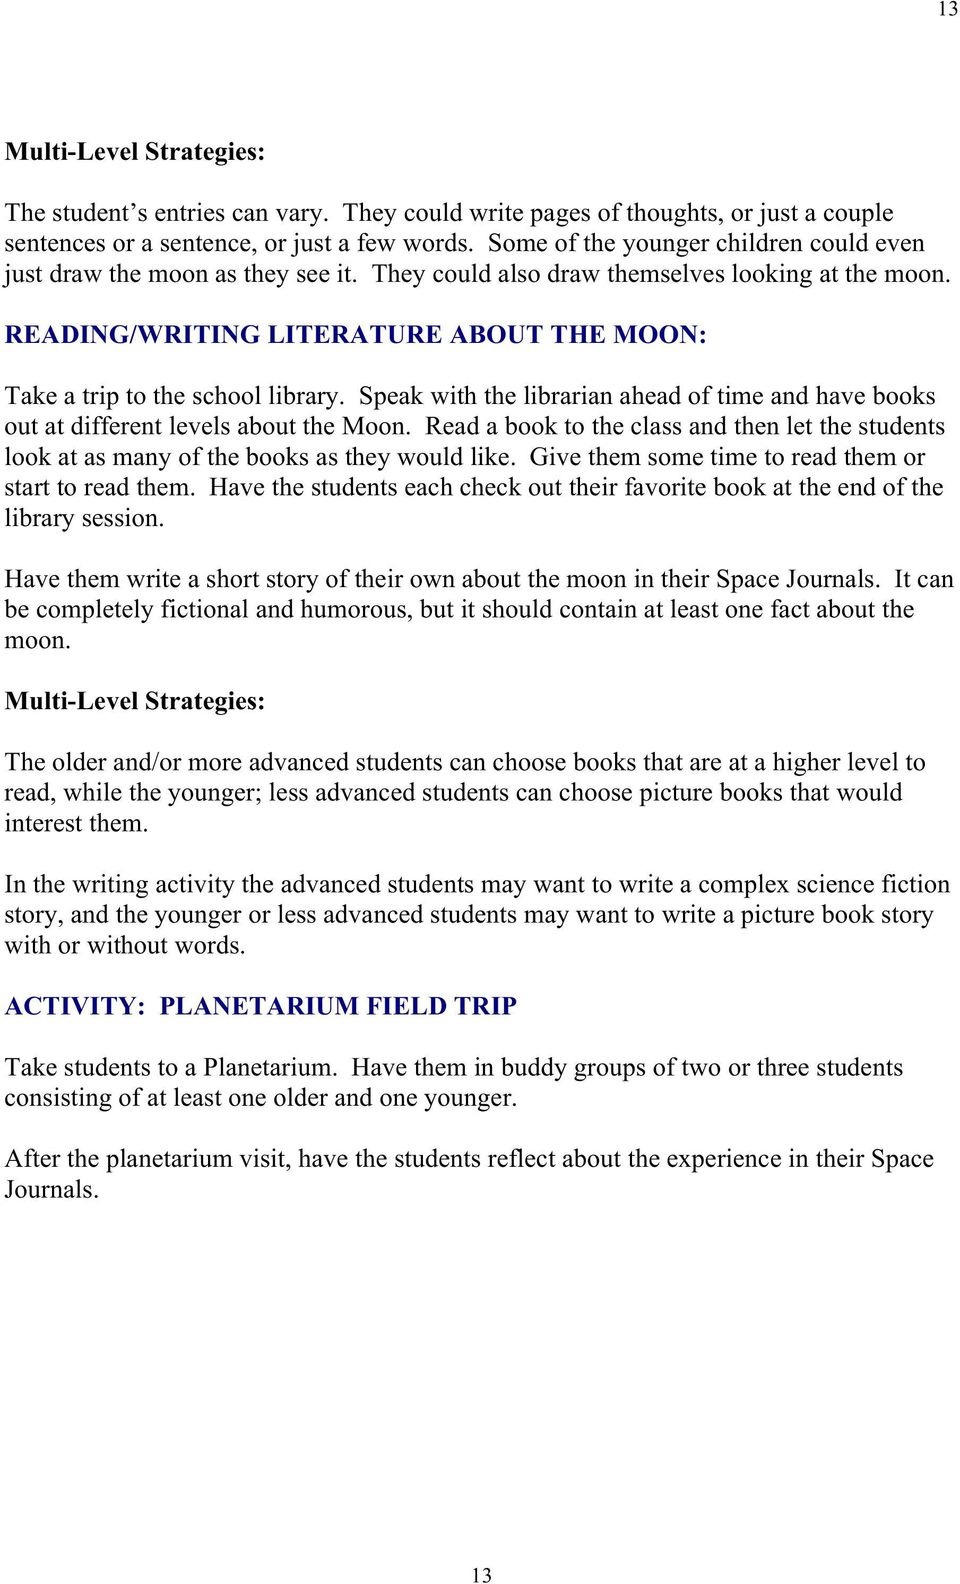 READING/WRITING LITERATURE ABOUT THE MOON: Take a trip to the school library. Speak with the librarian ahead of time and have books out at different levels about the Moon.